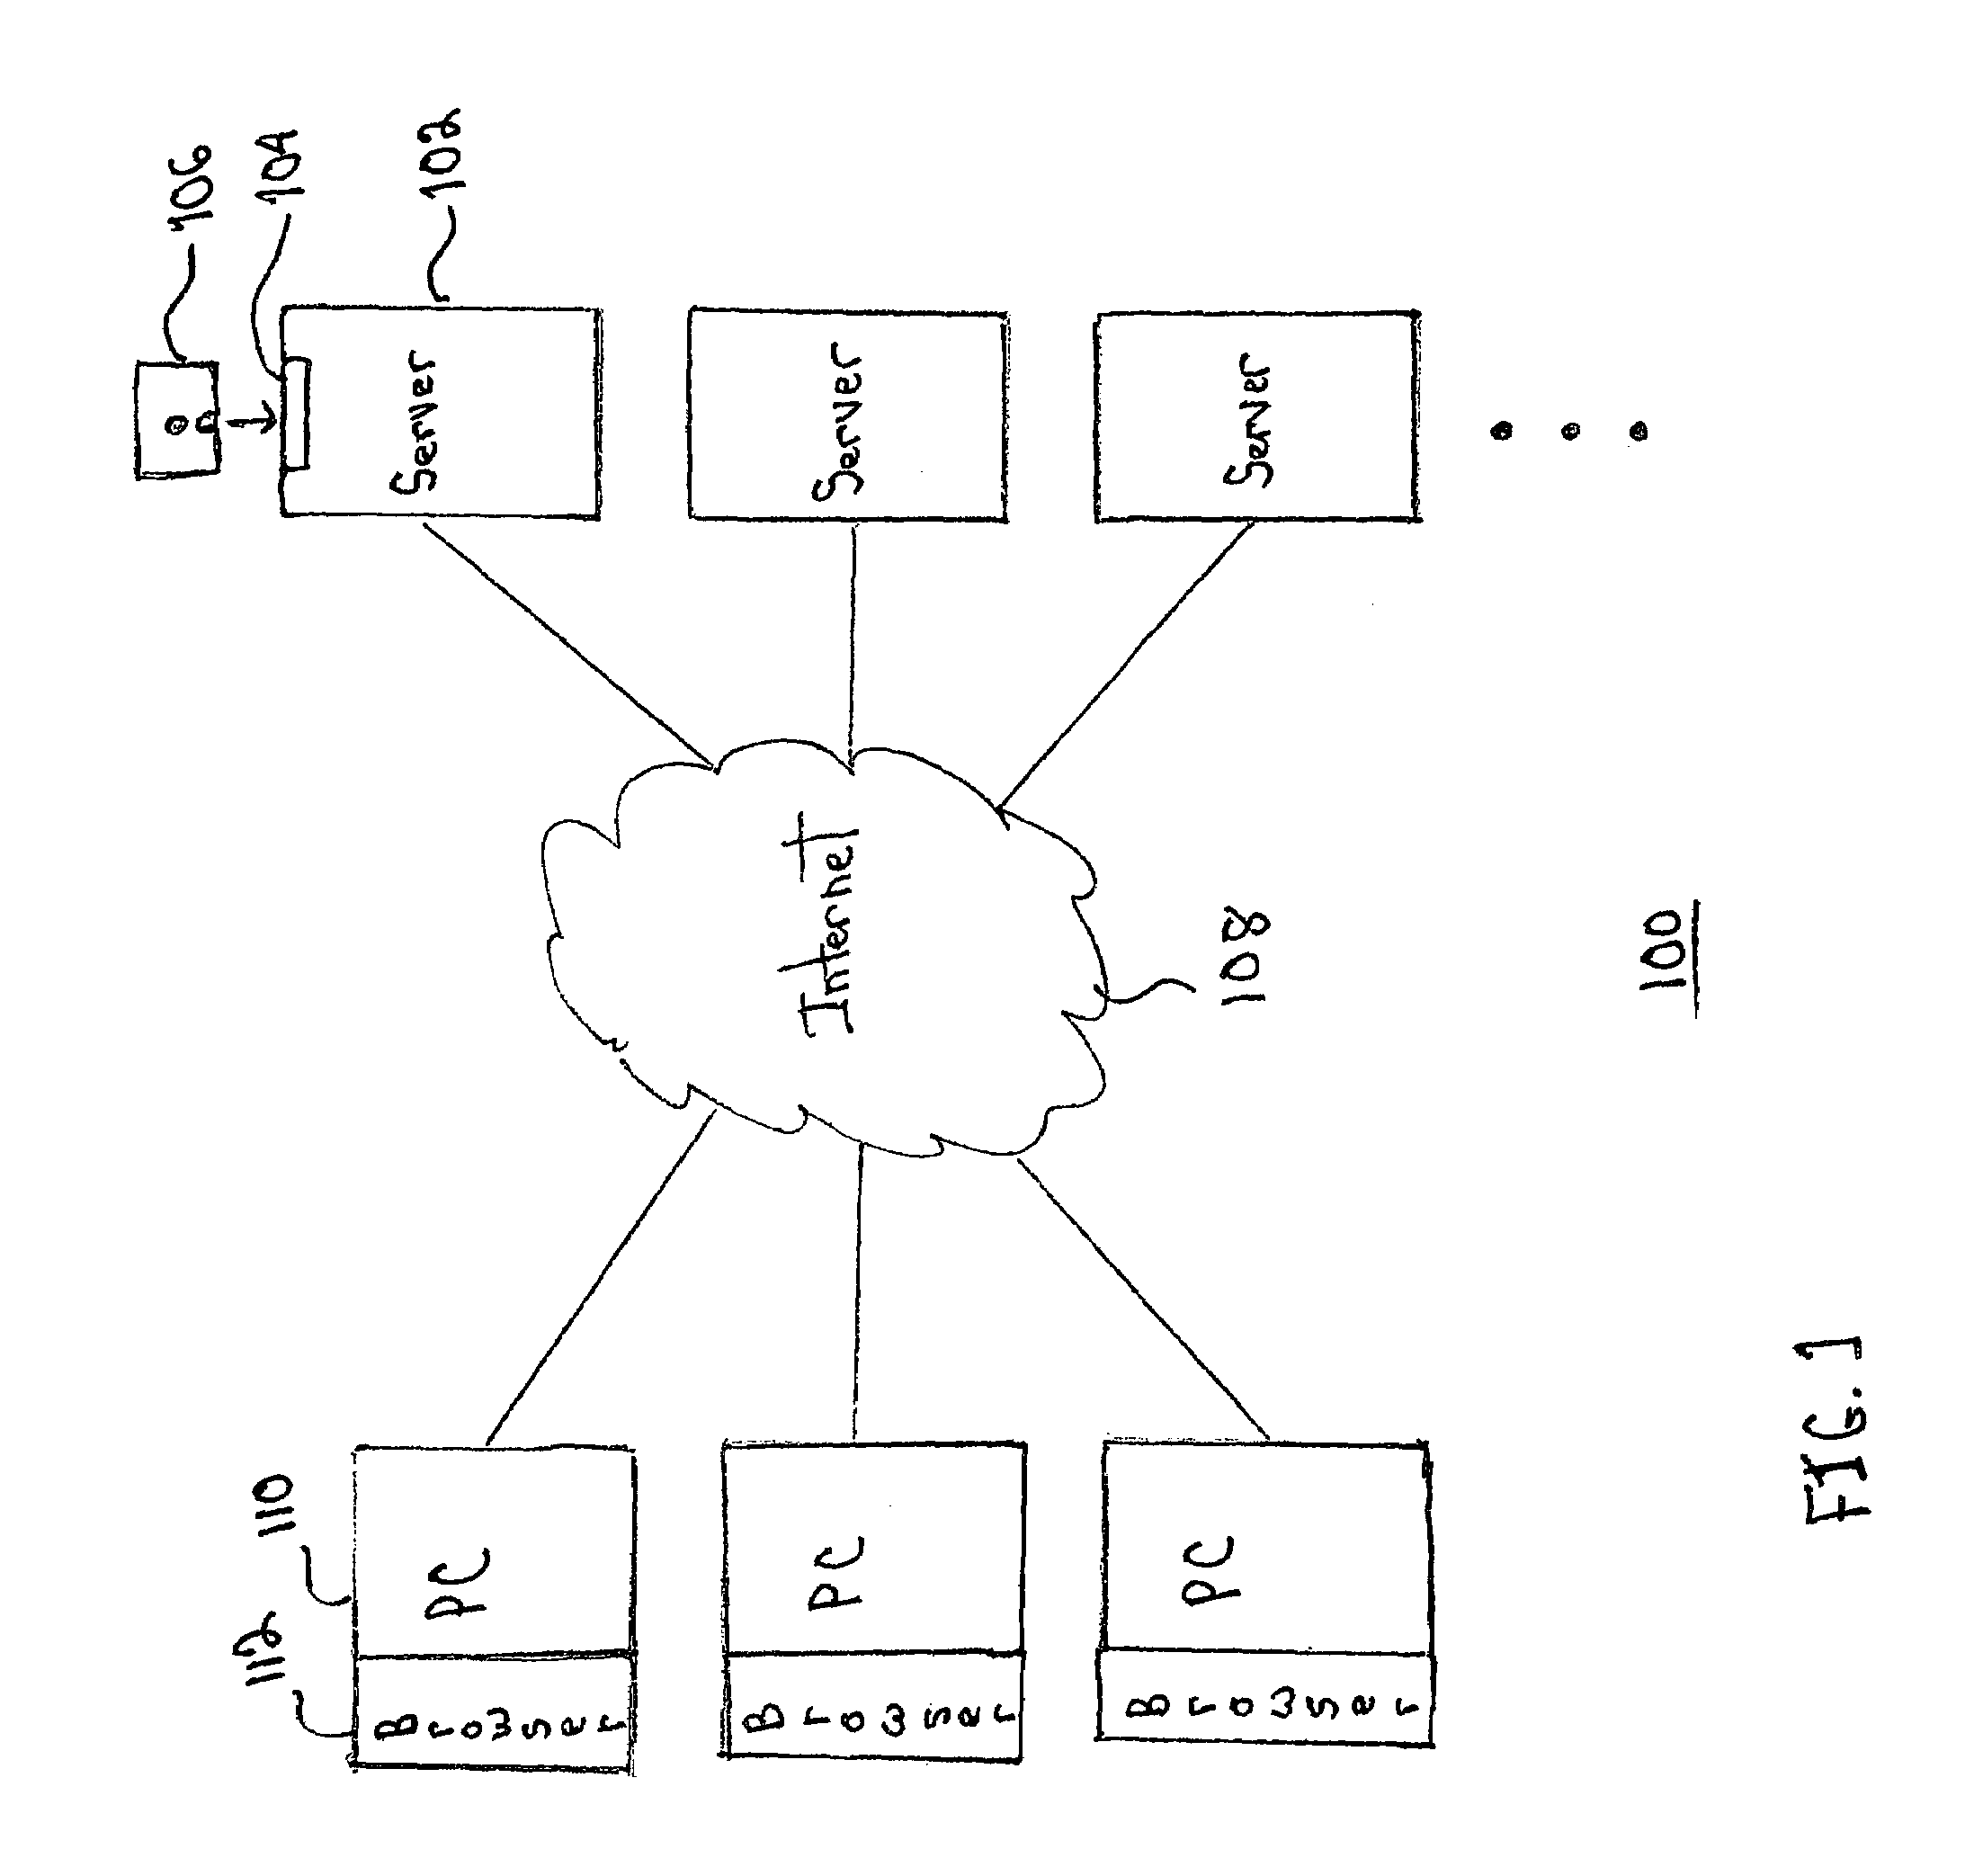 Method and apparatus to automate consumer replenishment shopping by periodicity